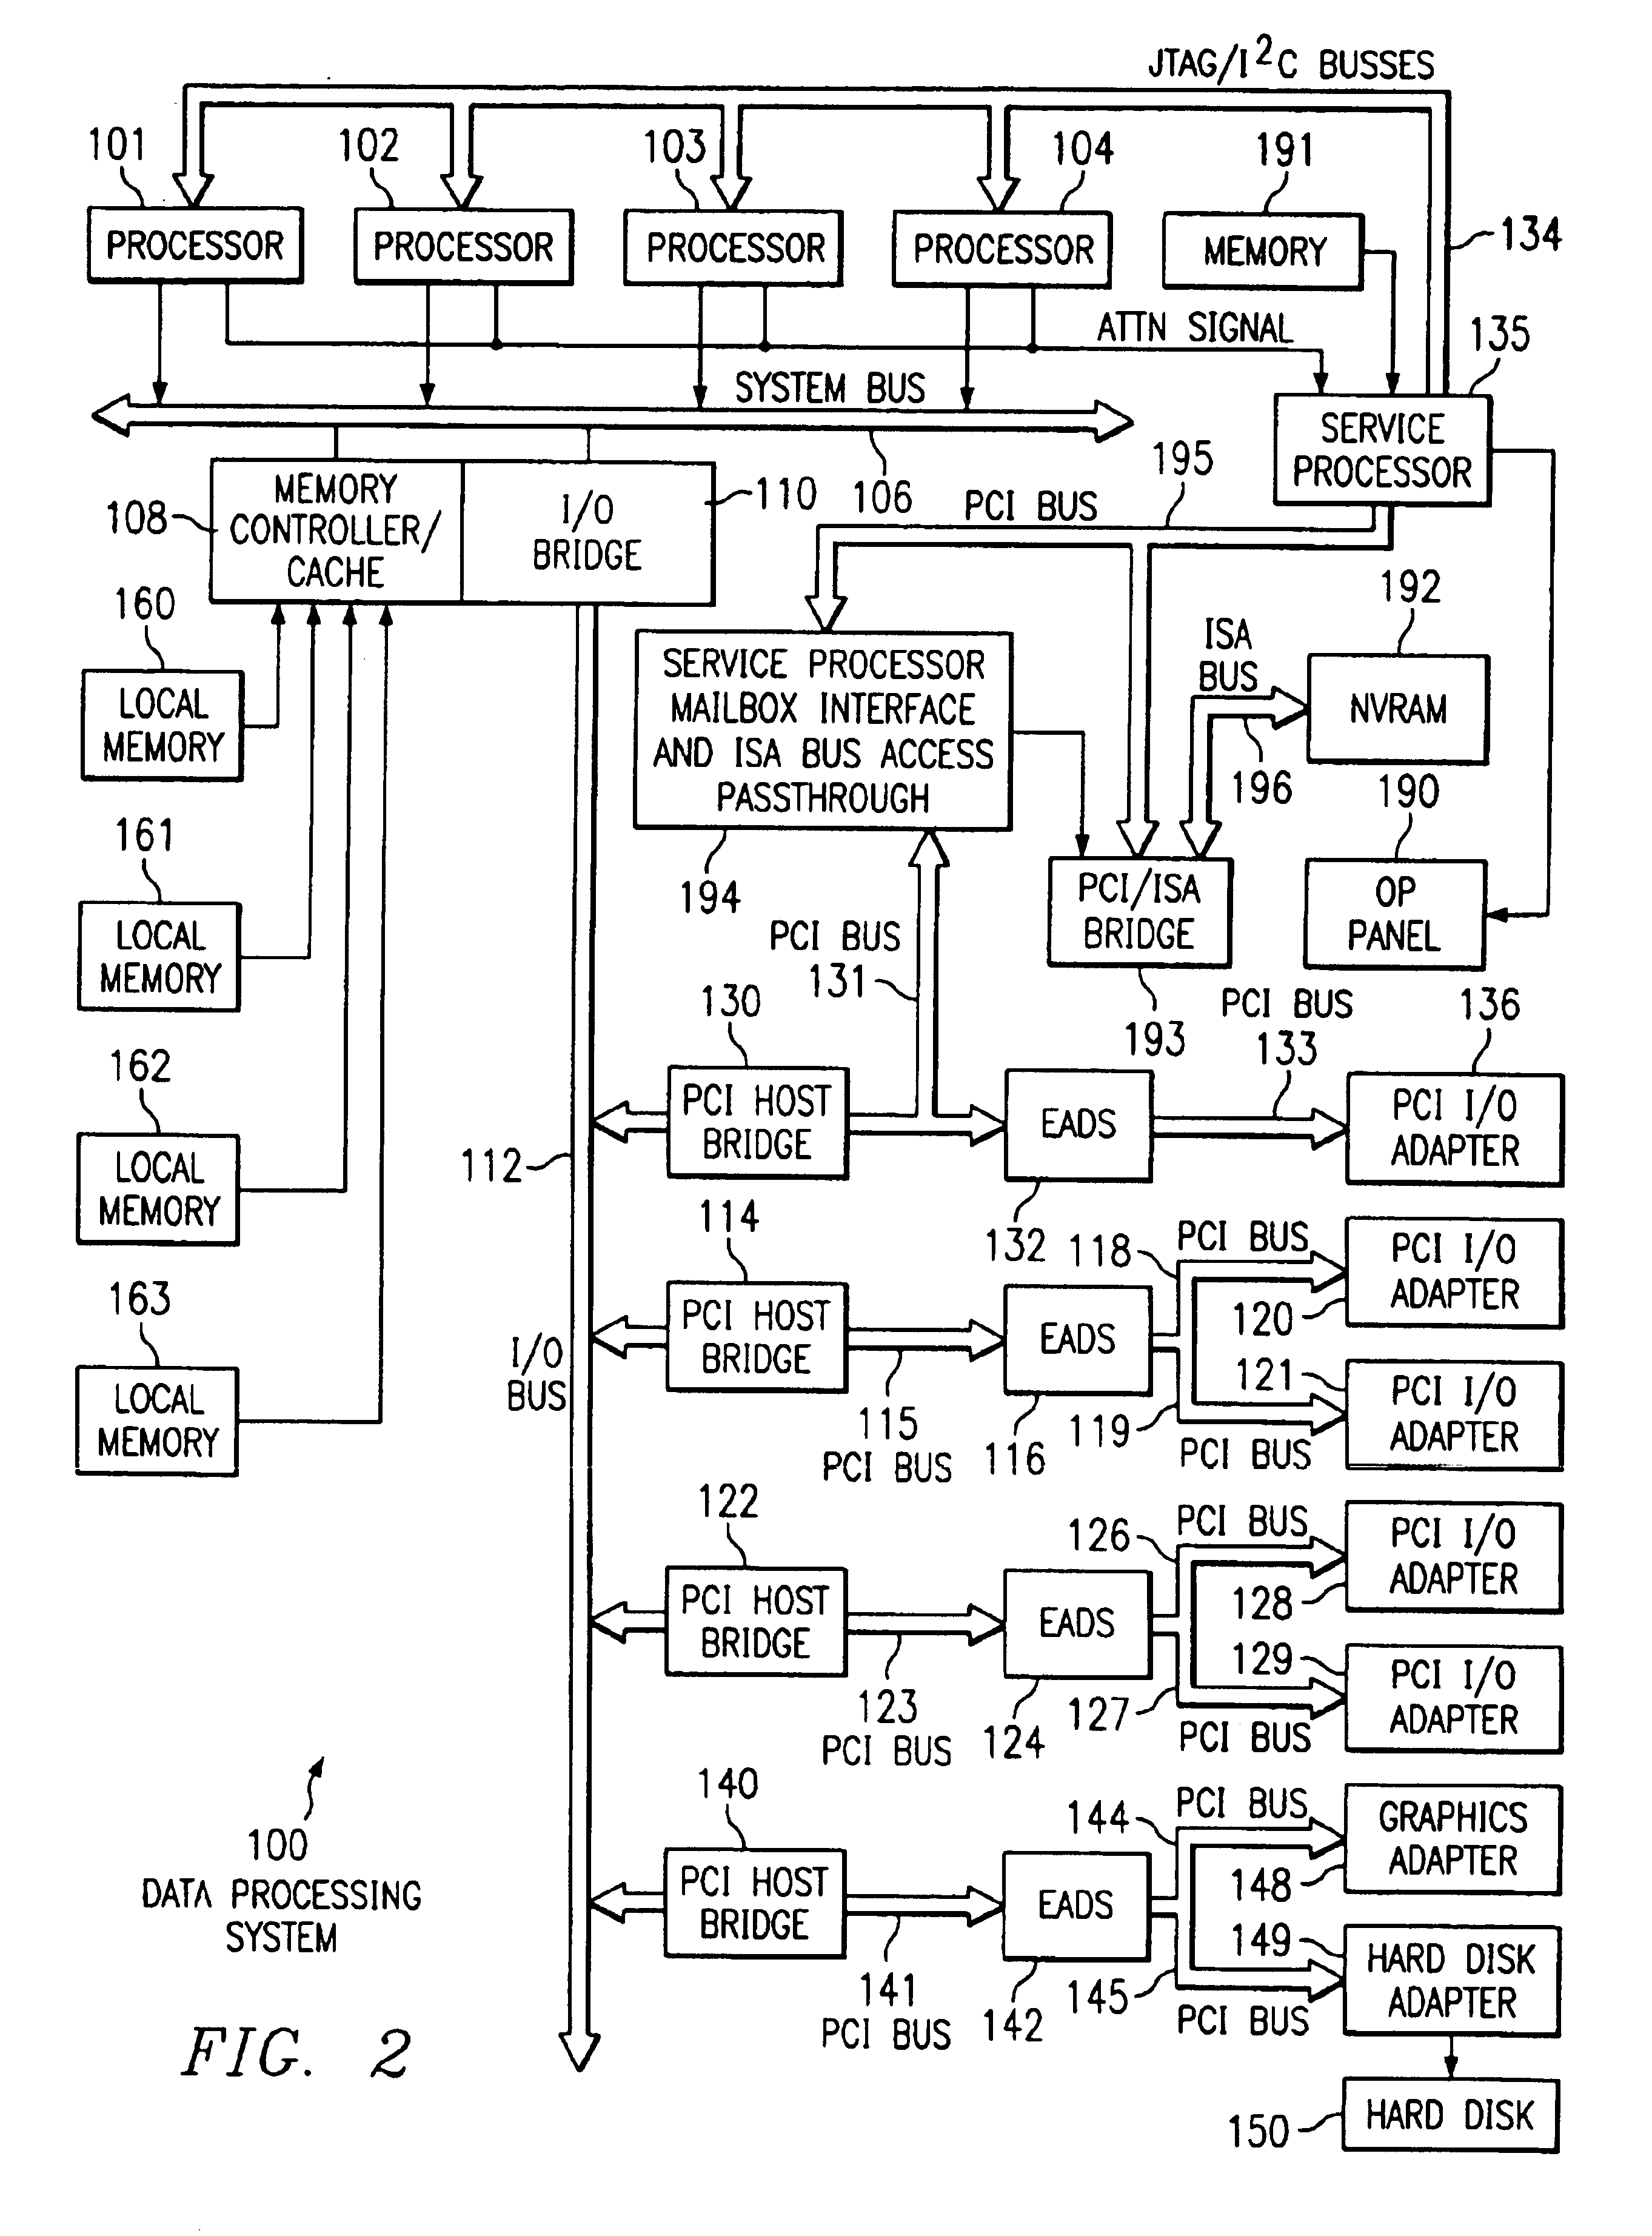 System, method, and computer program product for preserving trace data after partition crash in logically partitioned systems